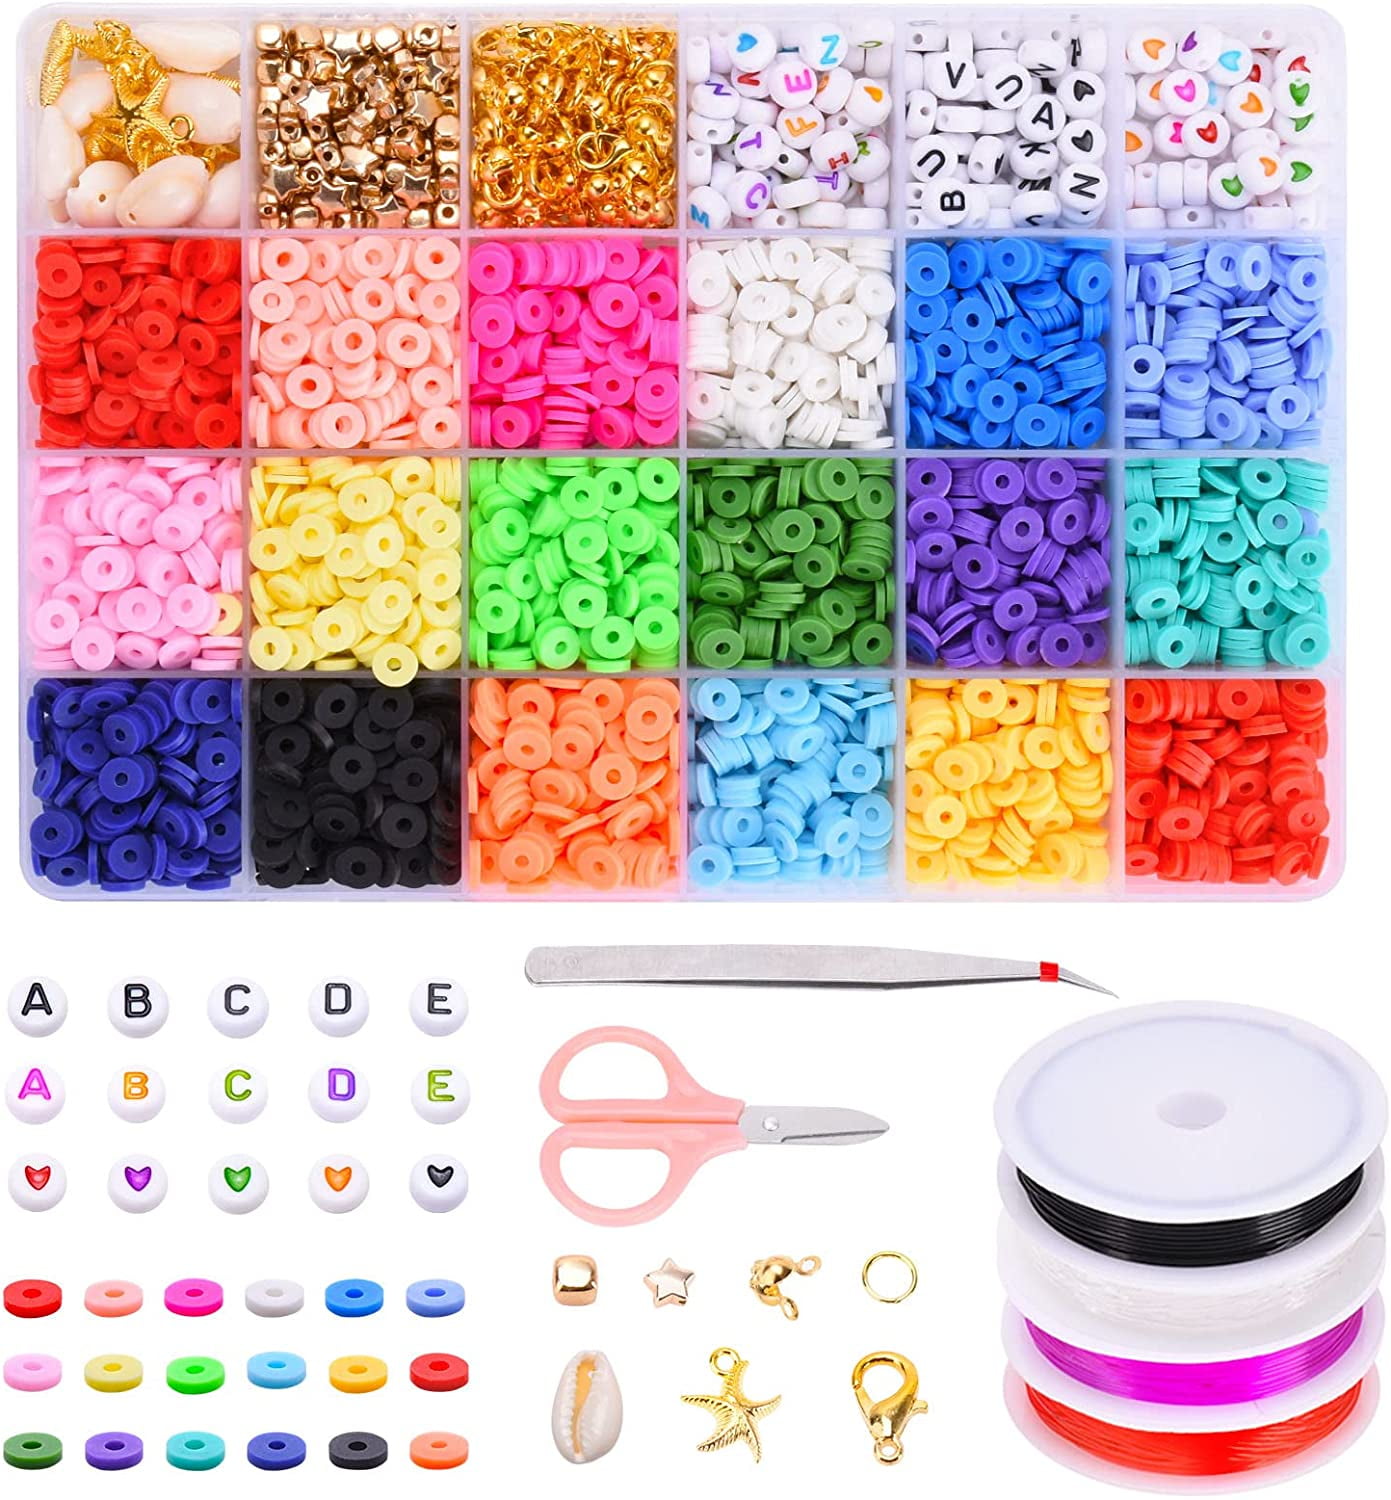 QUEFE 10800pcs Clay Beads for Bracelet Making Kit, 108 Colors Polymer  Heishi Beads, Charming Bracelet Making Kit for Girls 8-12, Letter Beads for  Jewelry Making Kit, for Preppy, Gifts, Crafts